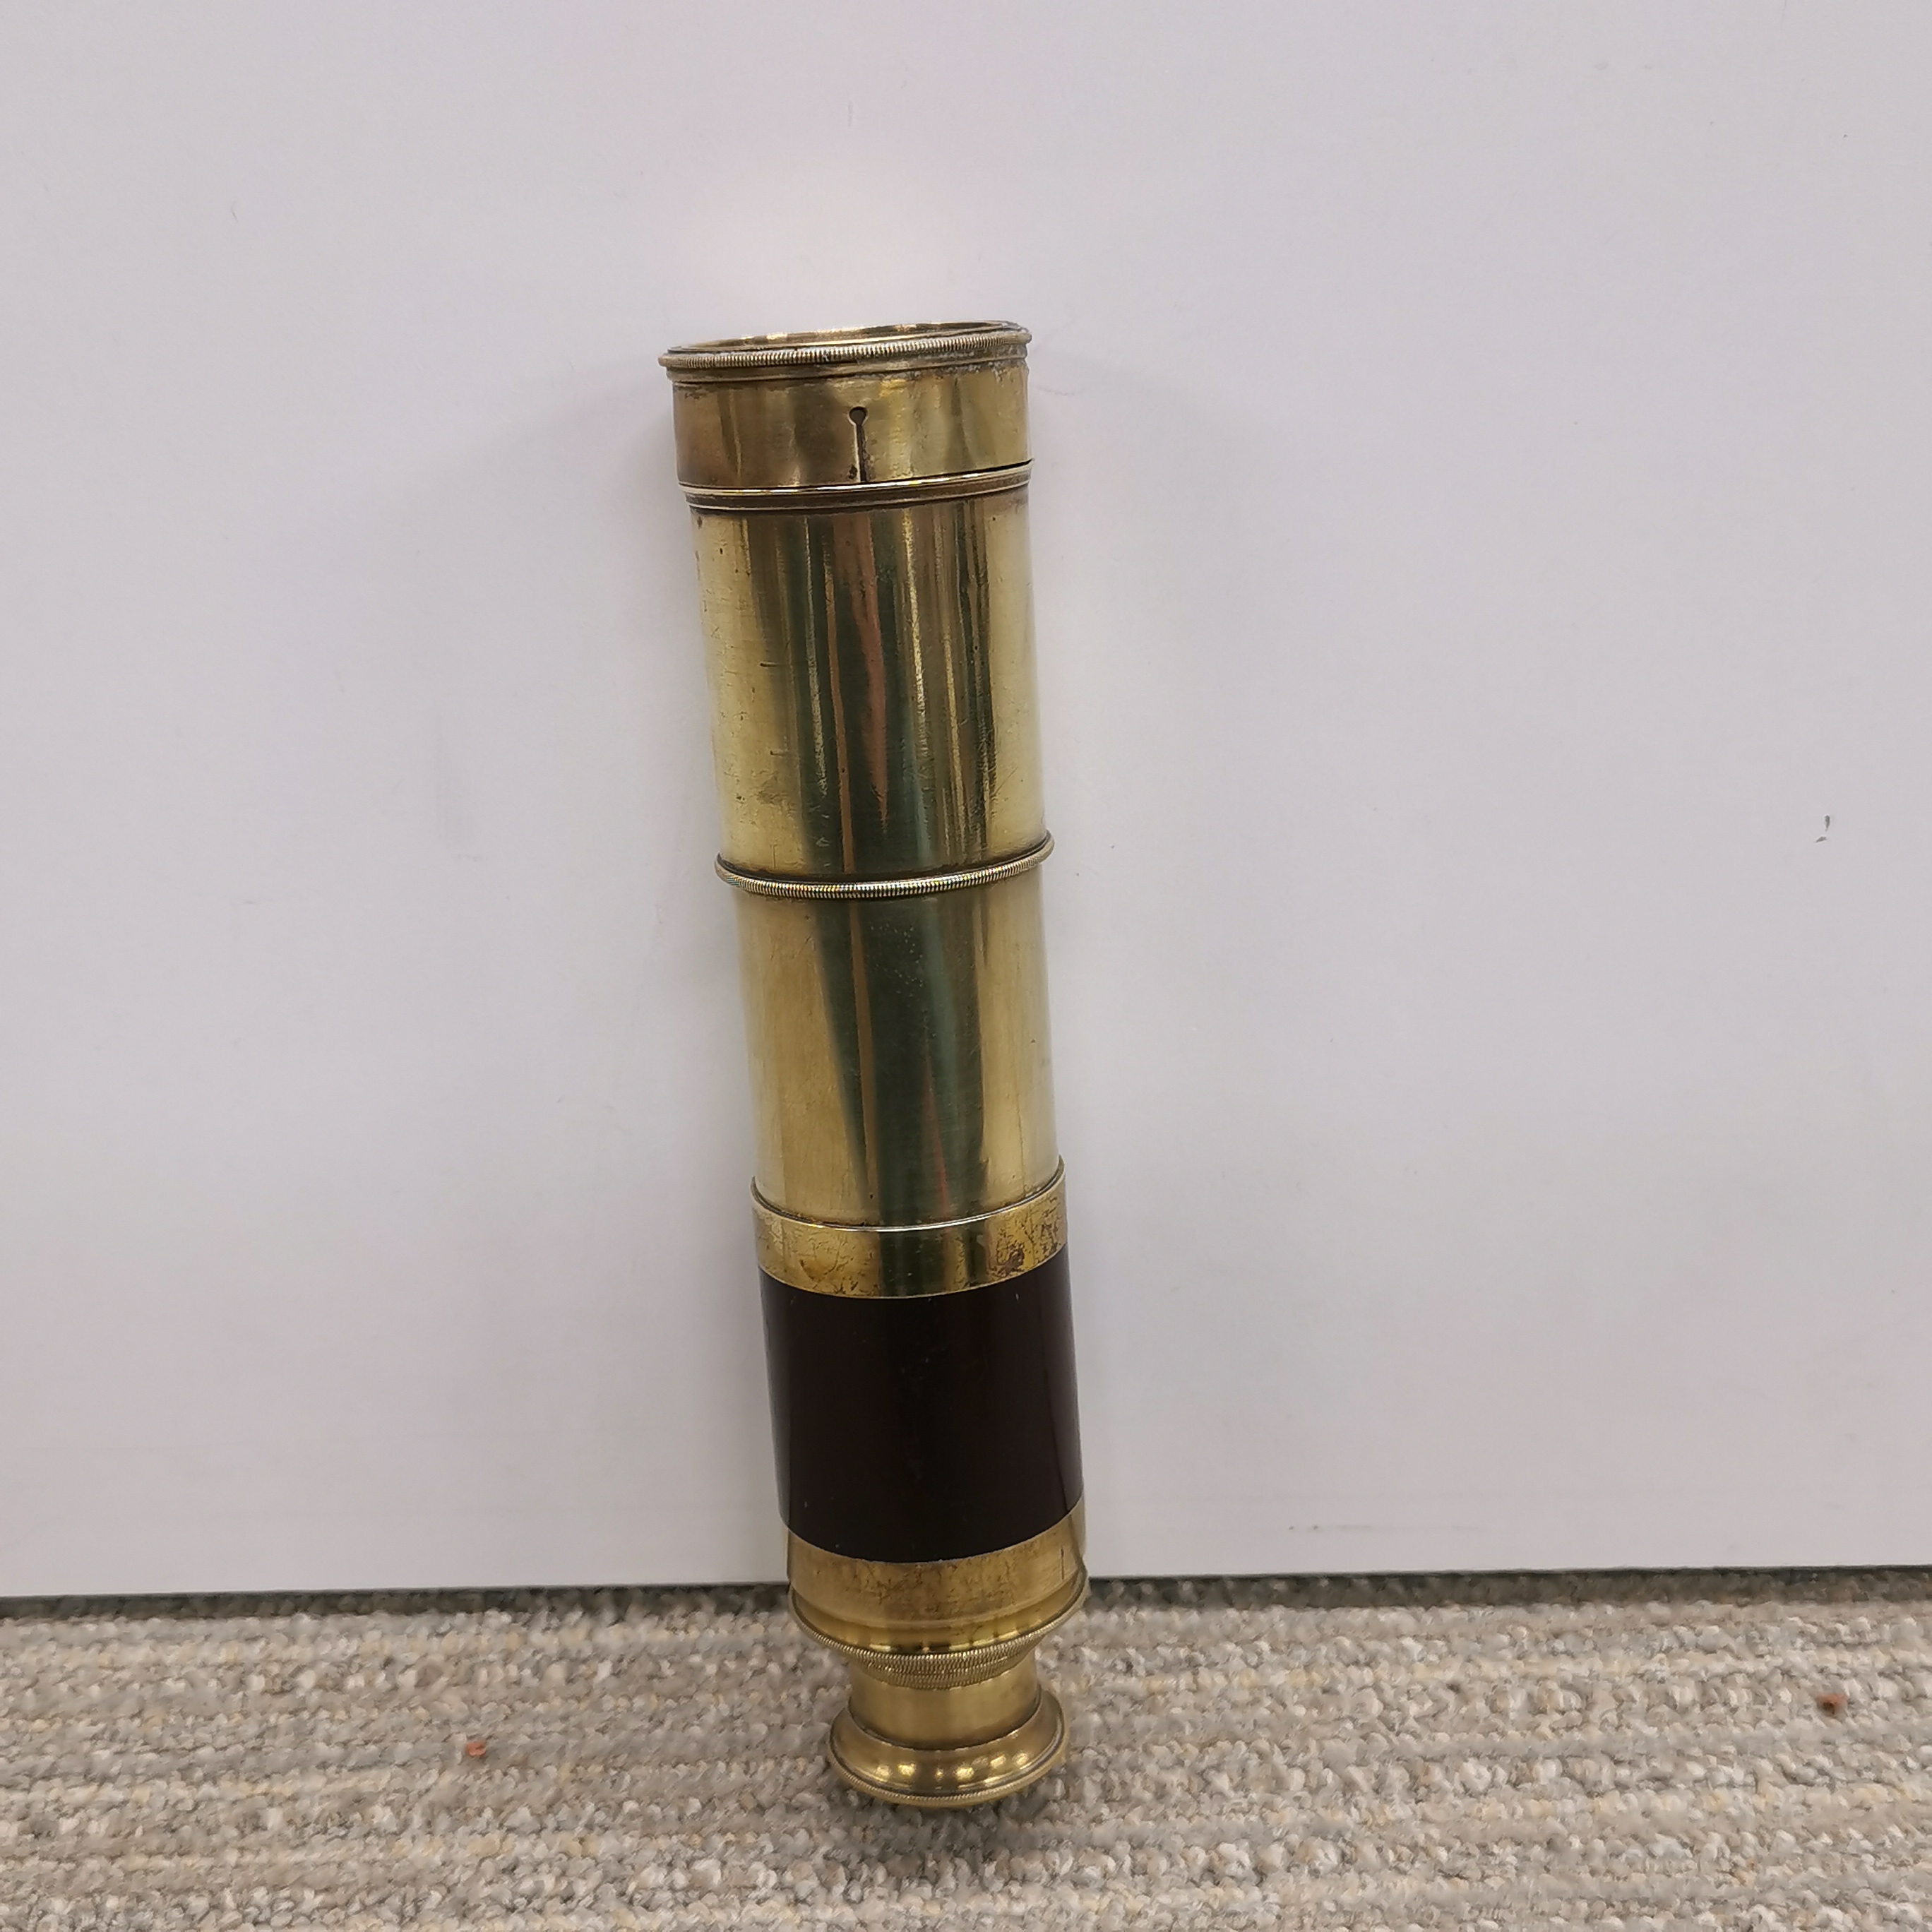 An old brass telescope, closed L. 18cm, Open L. 57cm. - Image 5 of 5